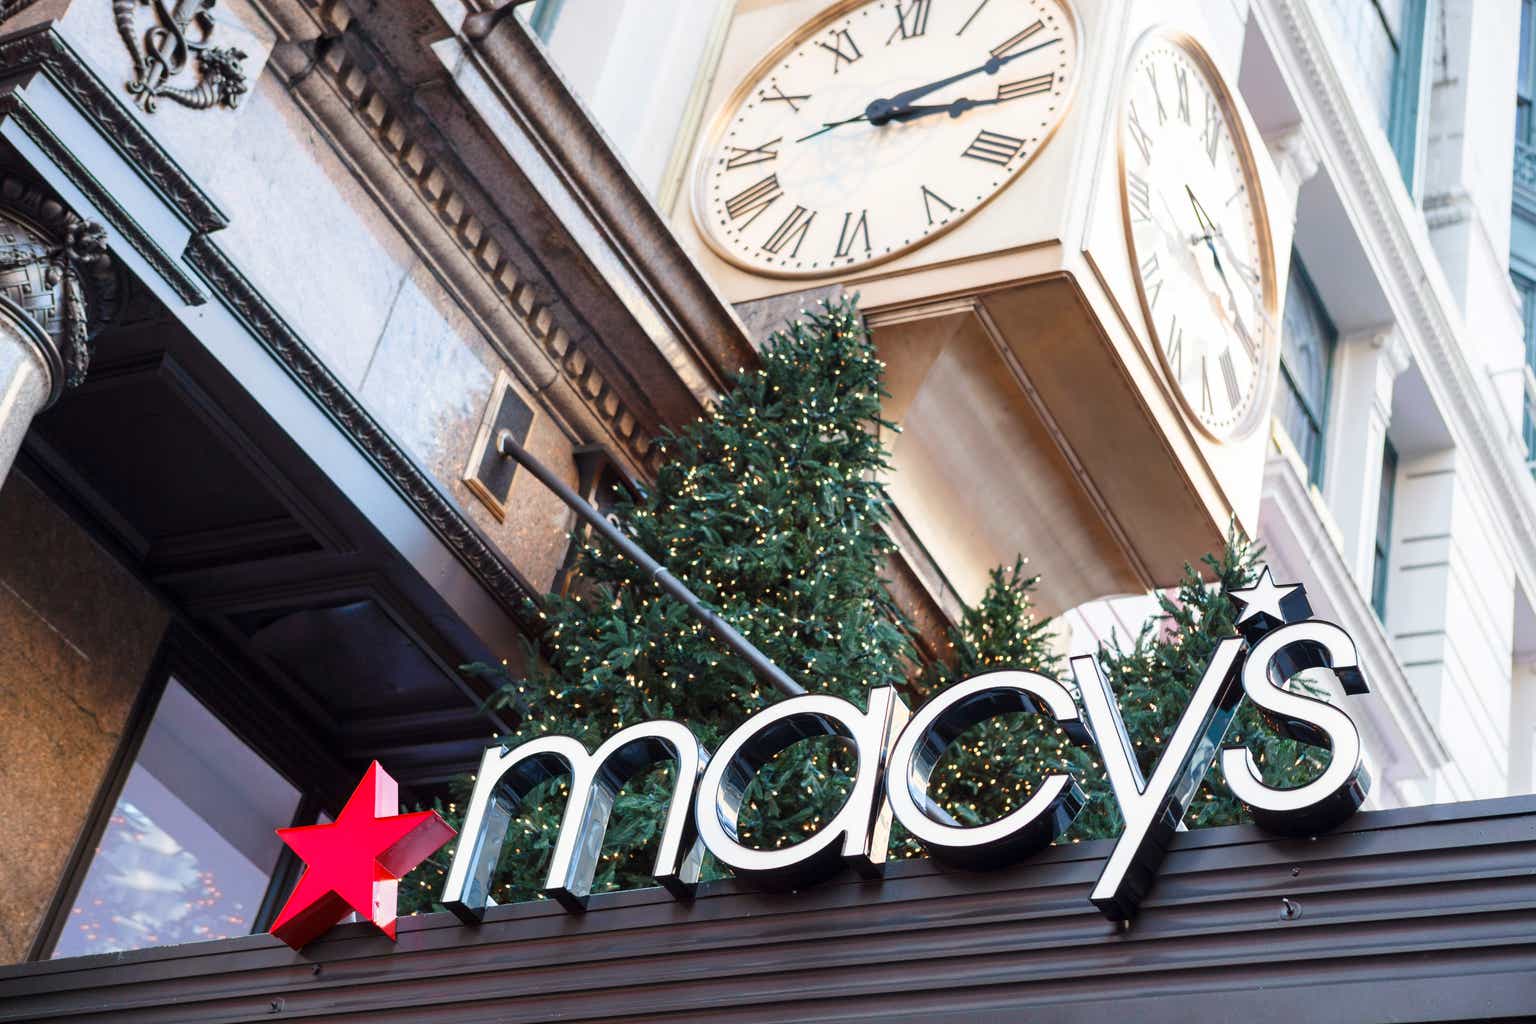 Macy’s Q2 Earnings Preview And Other Considerations (NYSEM) Seeking